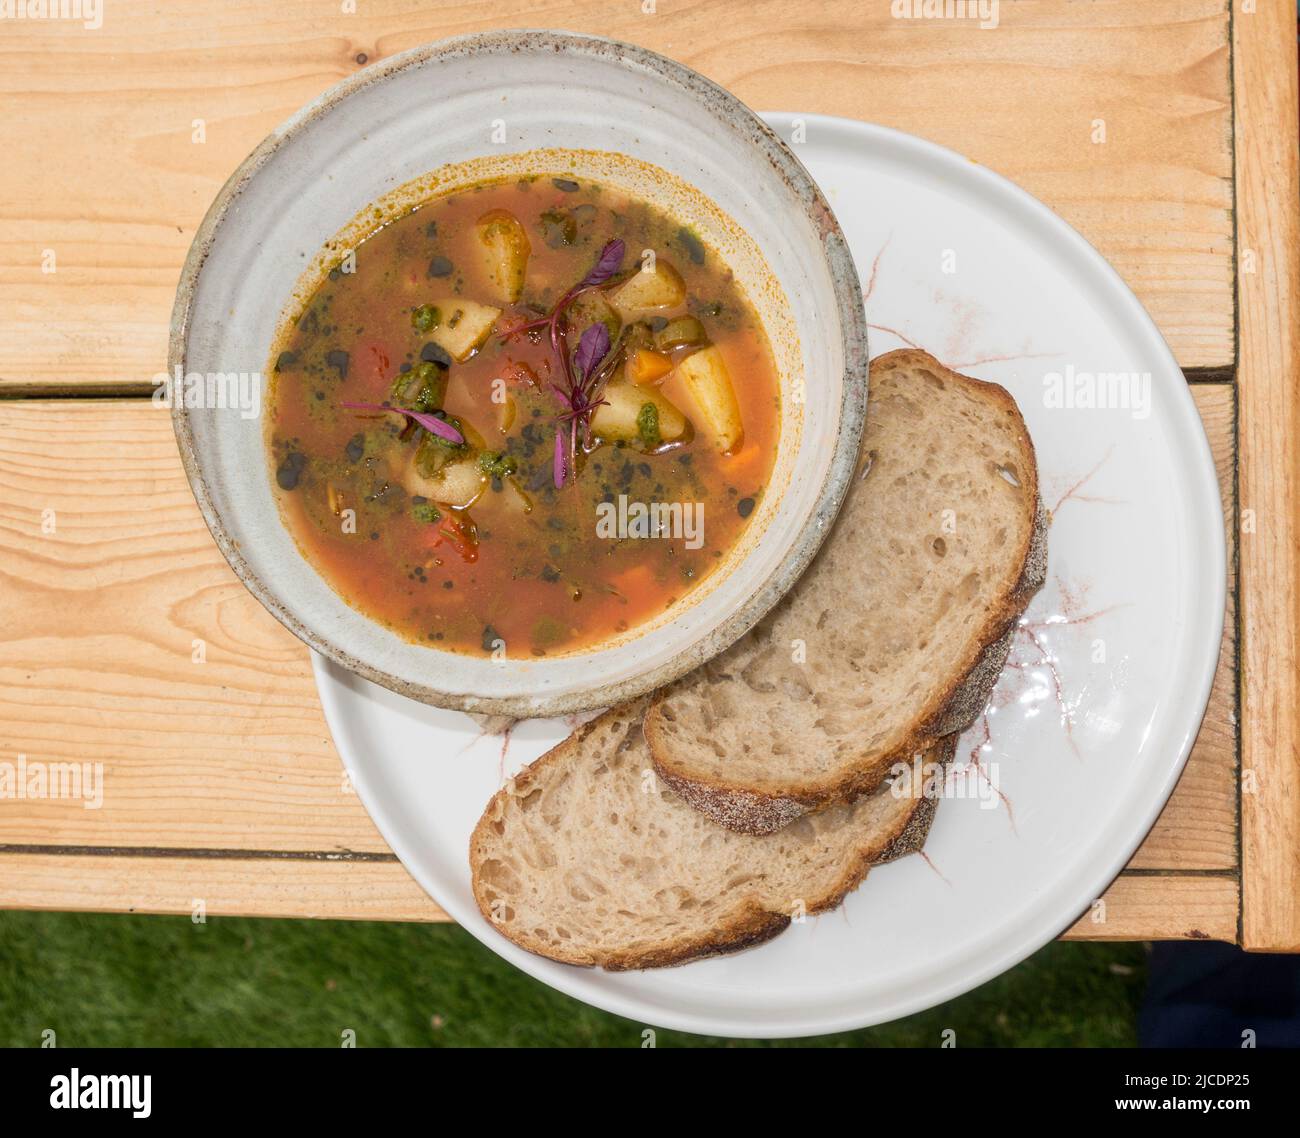 A bowl of tomato and spinach soup served with sourdough bread Stock Photo